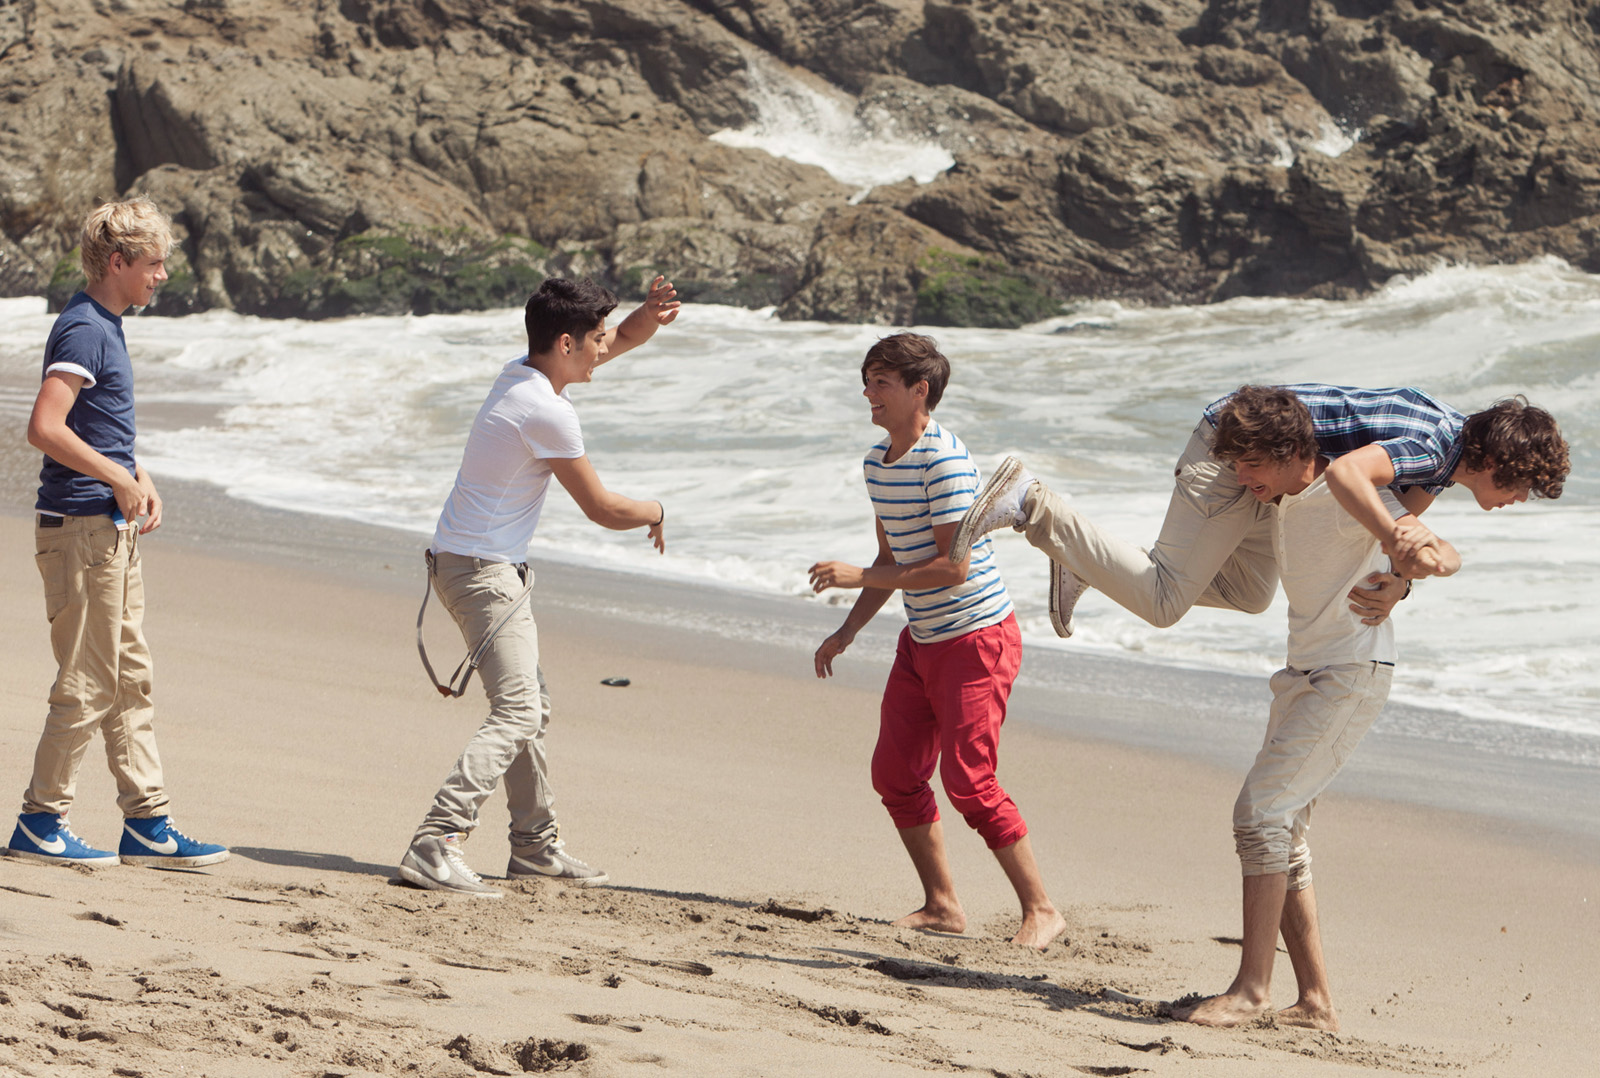 Niall Horan in Music Video: What Makes You Beautiful